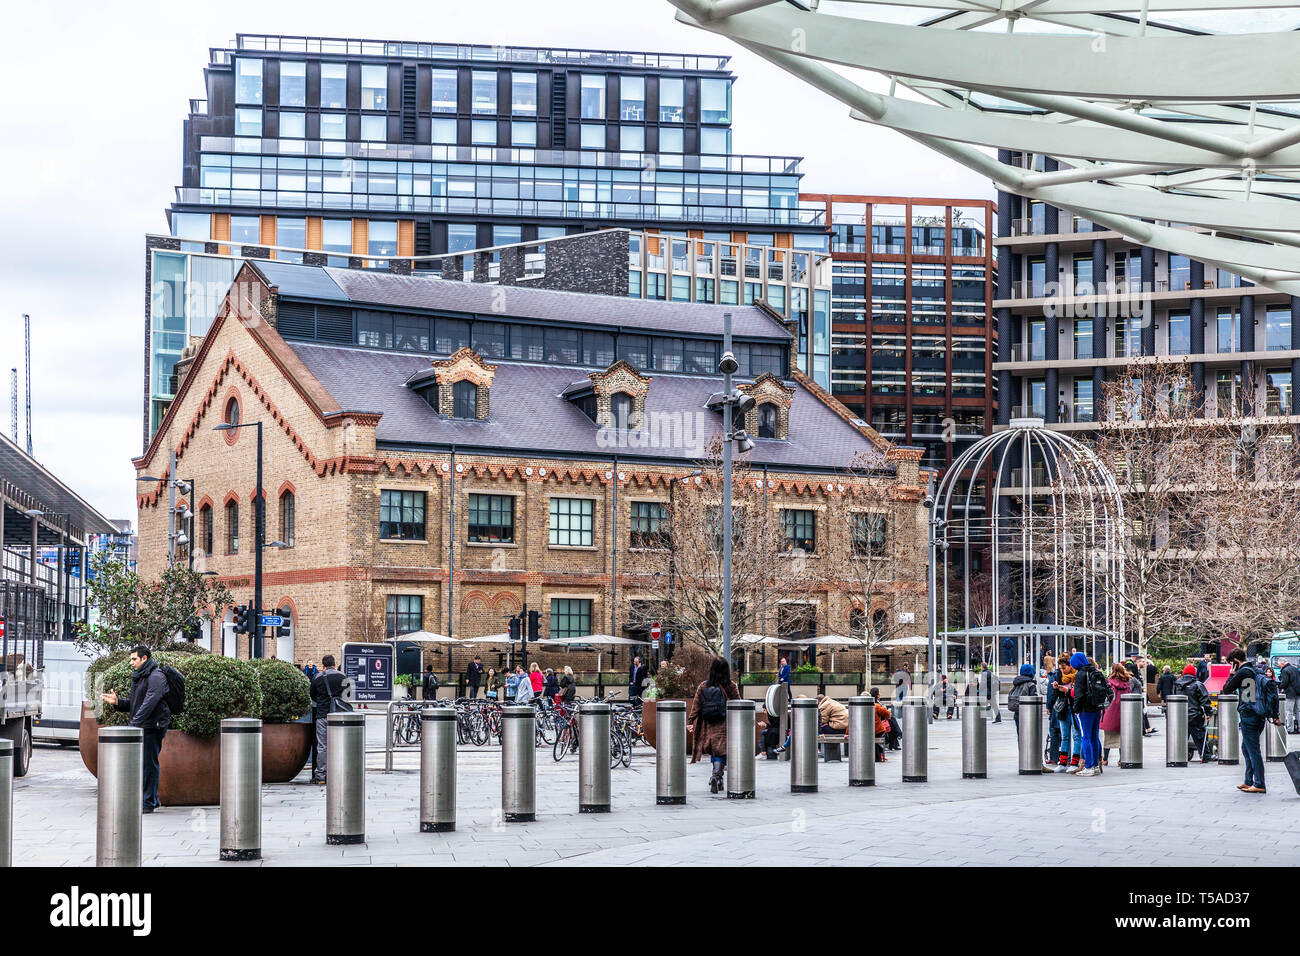 Buildings and structures outside King's Cross Railway Station, Kings Cross, London, N1C, England, UK. Stock Photo